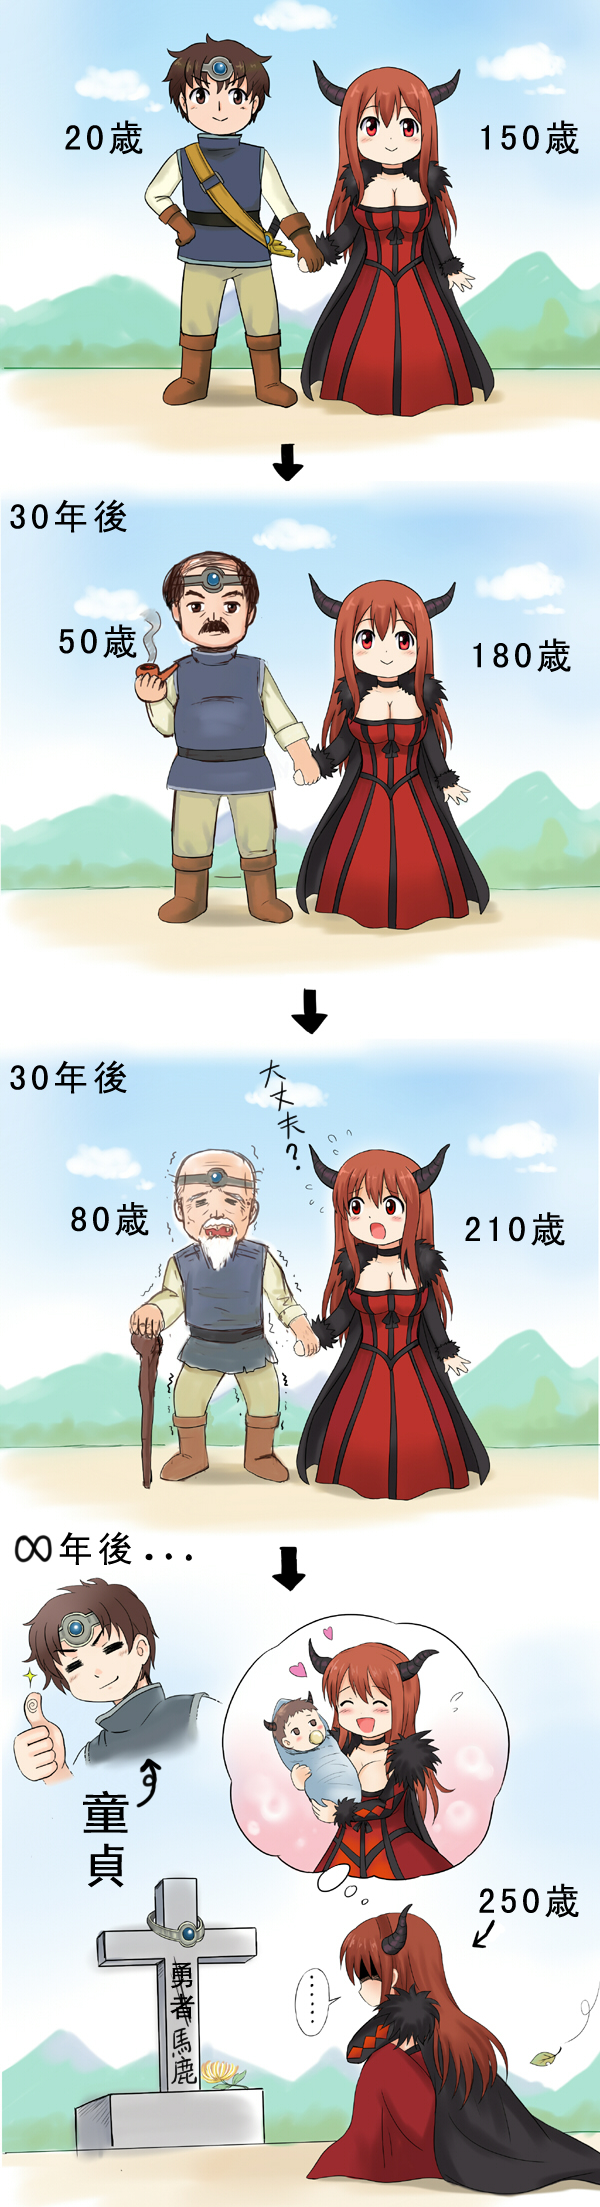 1boy 1girl ^_^ age_difference baby beard blush breasts brown_eyes brown_hair choker cleavage closed_eyes dress facial_hair female gloves grave heart holding_hands horns imagining long_hair male maou_(maoyuu) maoyuu_maou_yuusha mustache old_man pipe red_dress red_eyes redhead short_hair smile tiara translated y.ssanoha yuusha_(maoyuu)